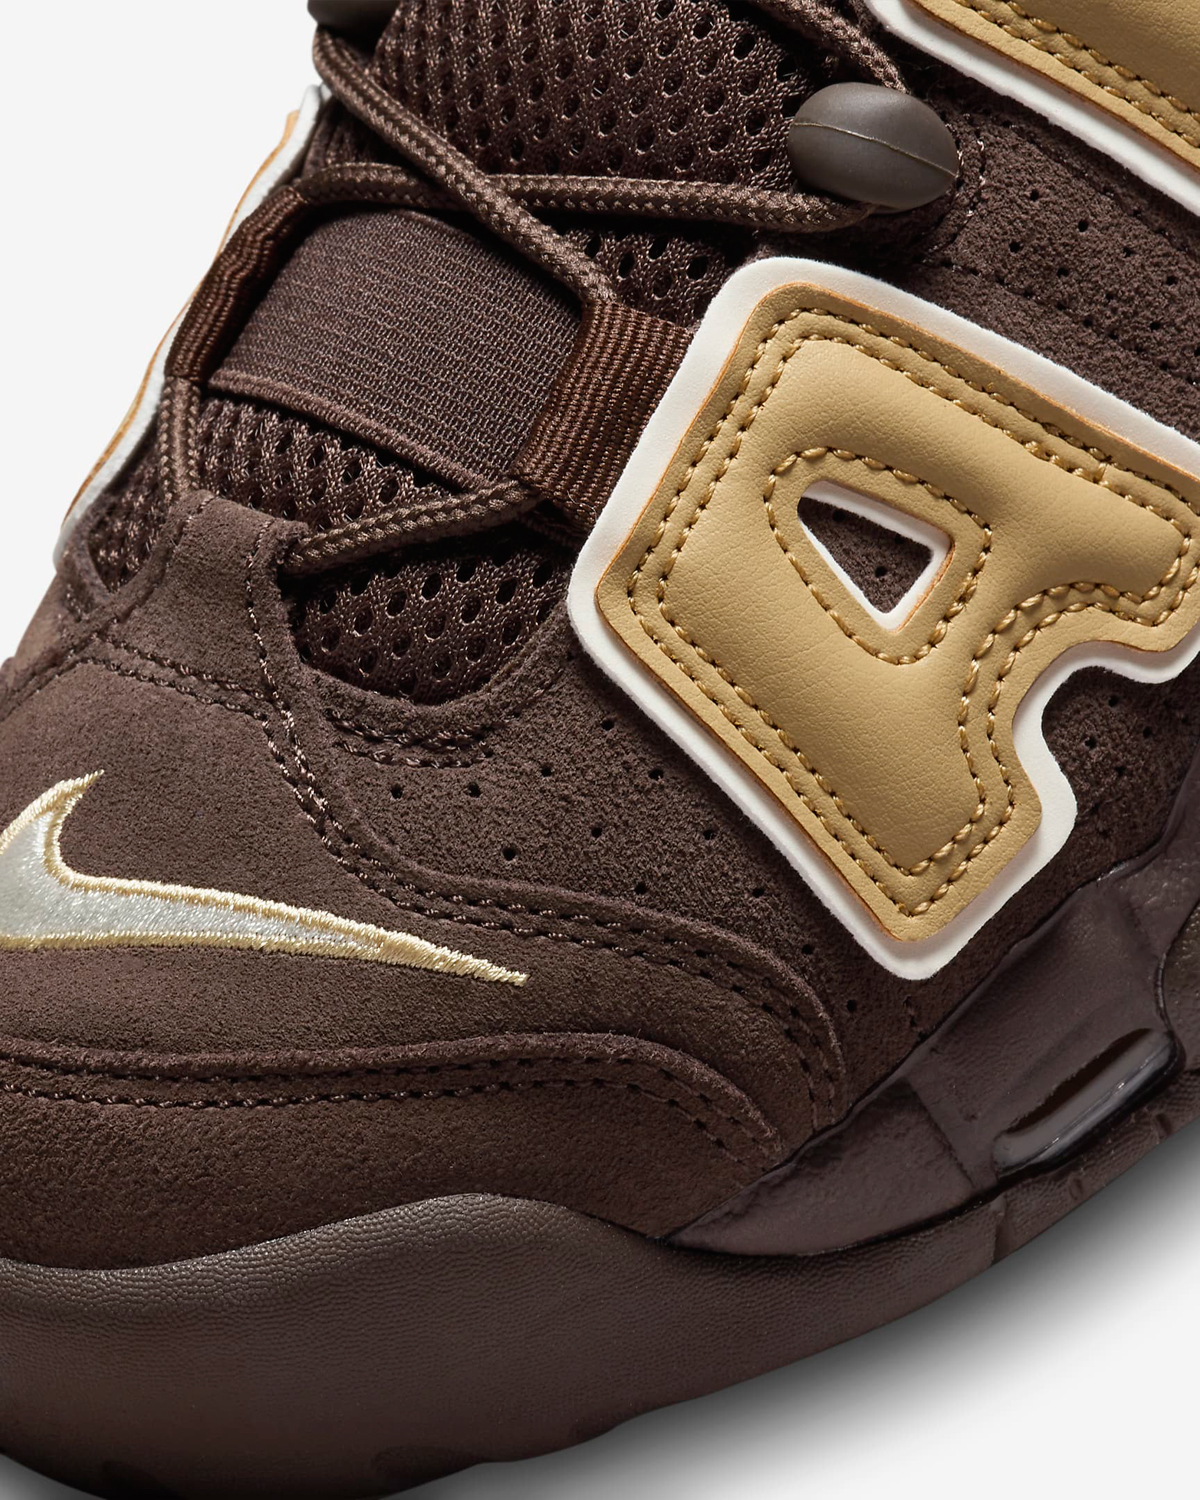 Nike-Air-More-Uptempo-96-Baroque-Brown-Release-Date-7